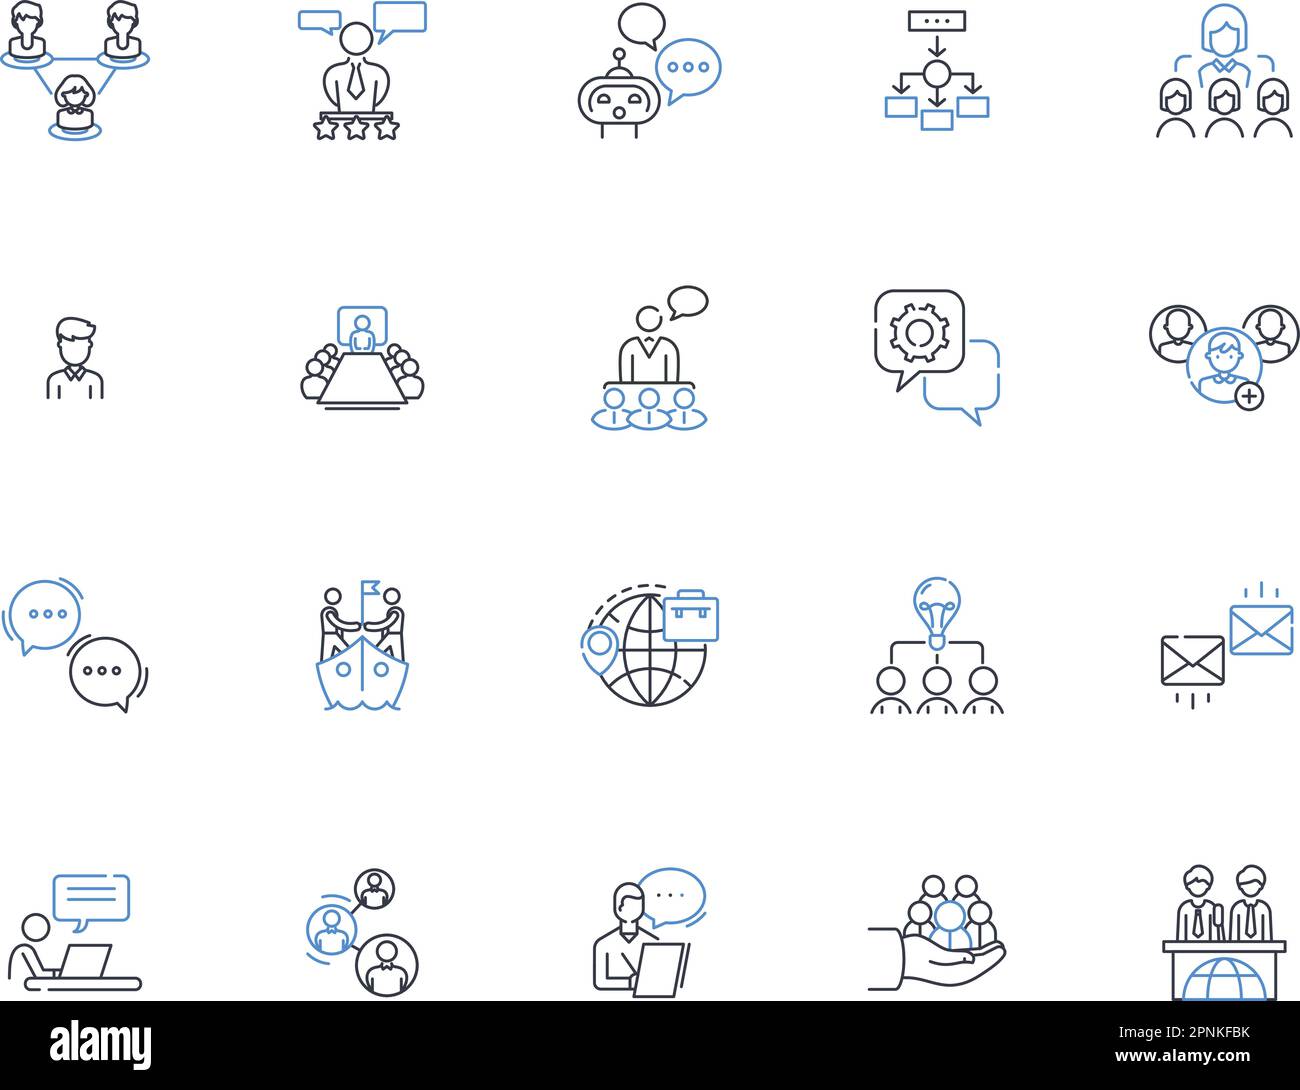 Fans line icons collection. Enthusiasts, Devotees, Adherents, Supporters, Aficionados, Buffs, Addicts vector and linear illustration. Fansatic Stock Vector